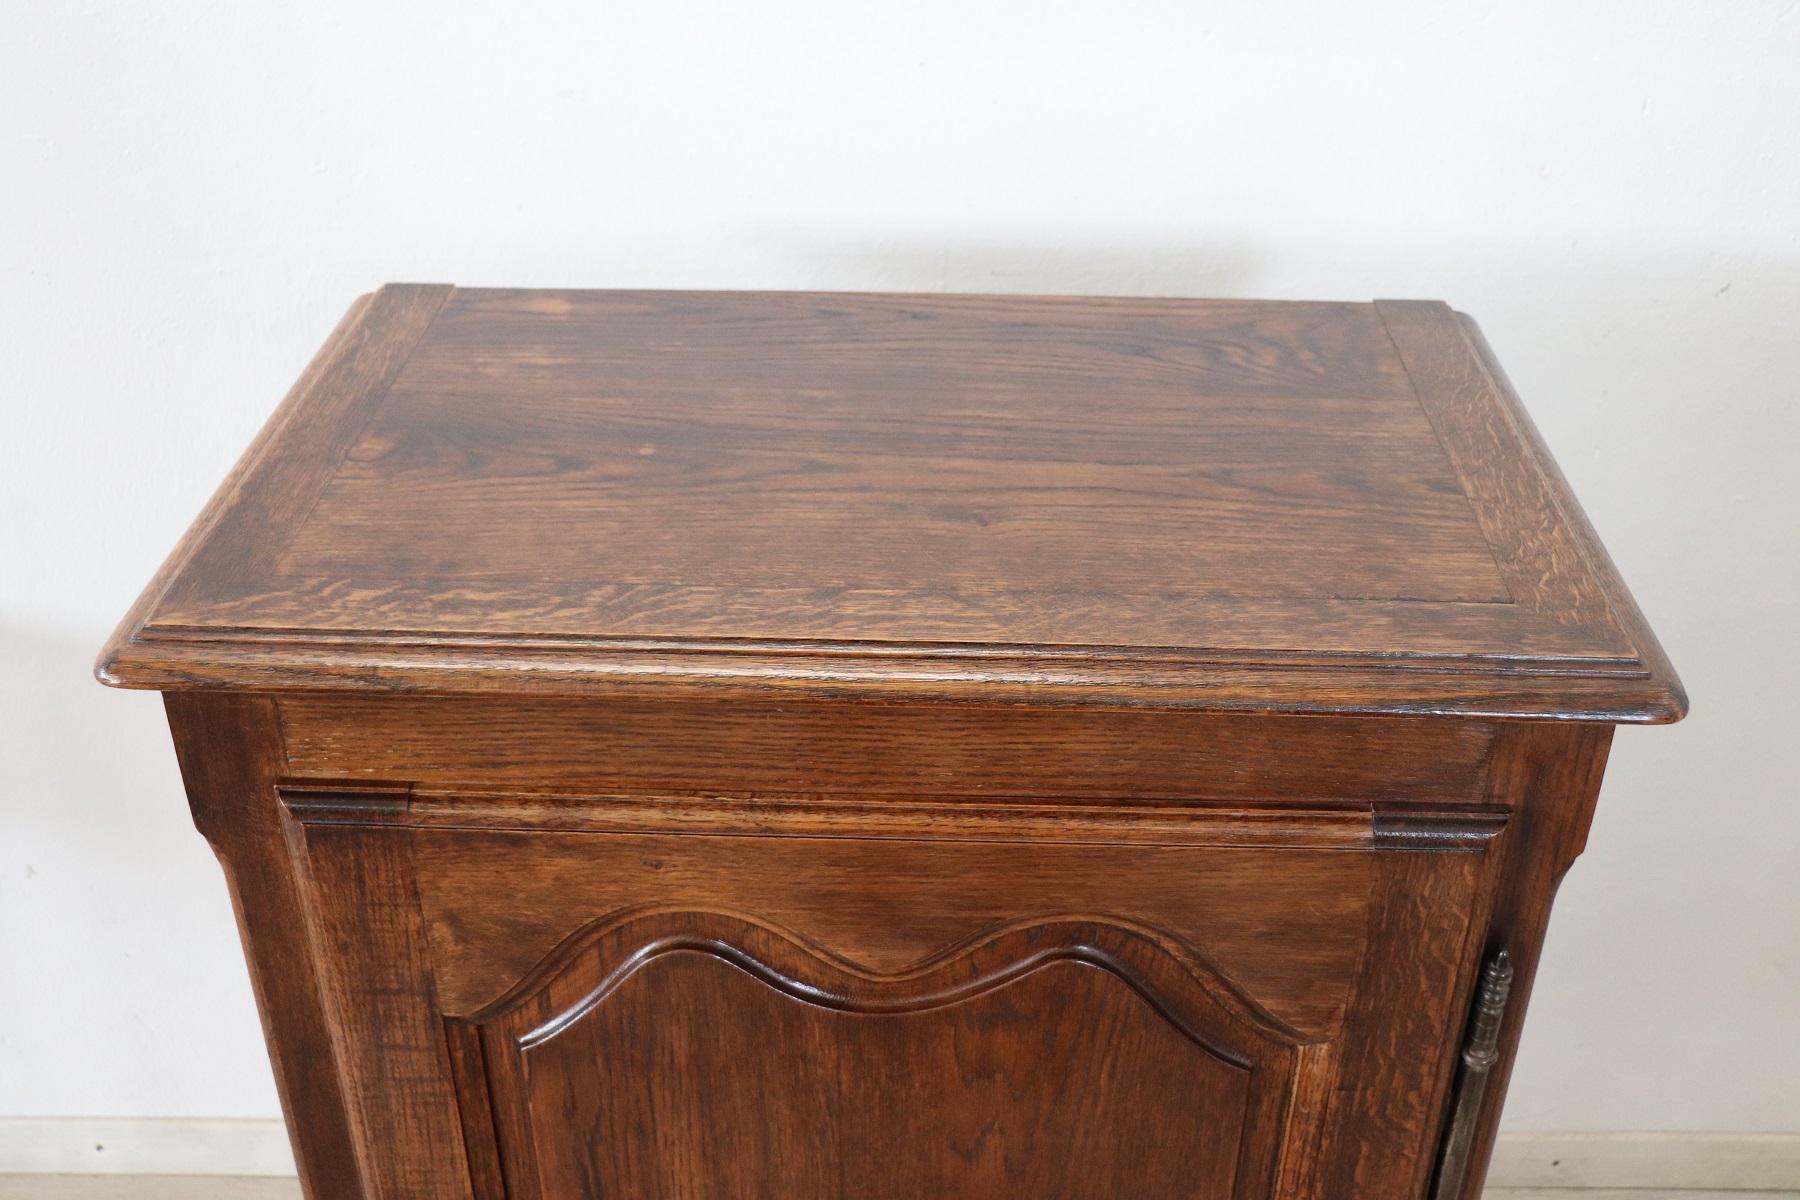 Particular small sideboard or cabinet in solid oakwood. In perfect French Louis XIV style with wavy legs. On the front one door with internal two shelfs. The internal shelfs can be moved as desired. This furniture is used but in perfect condition